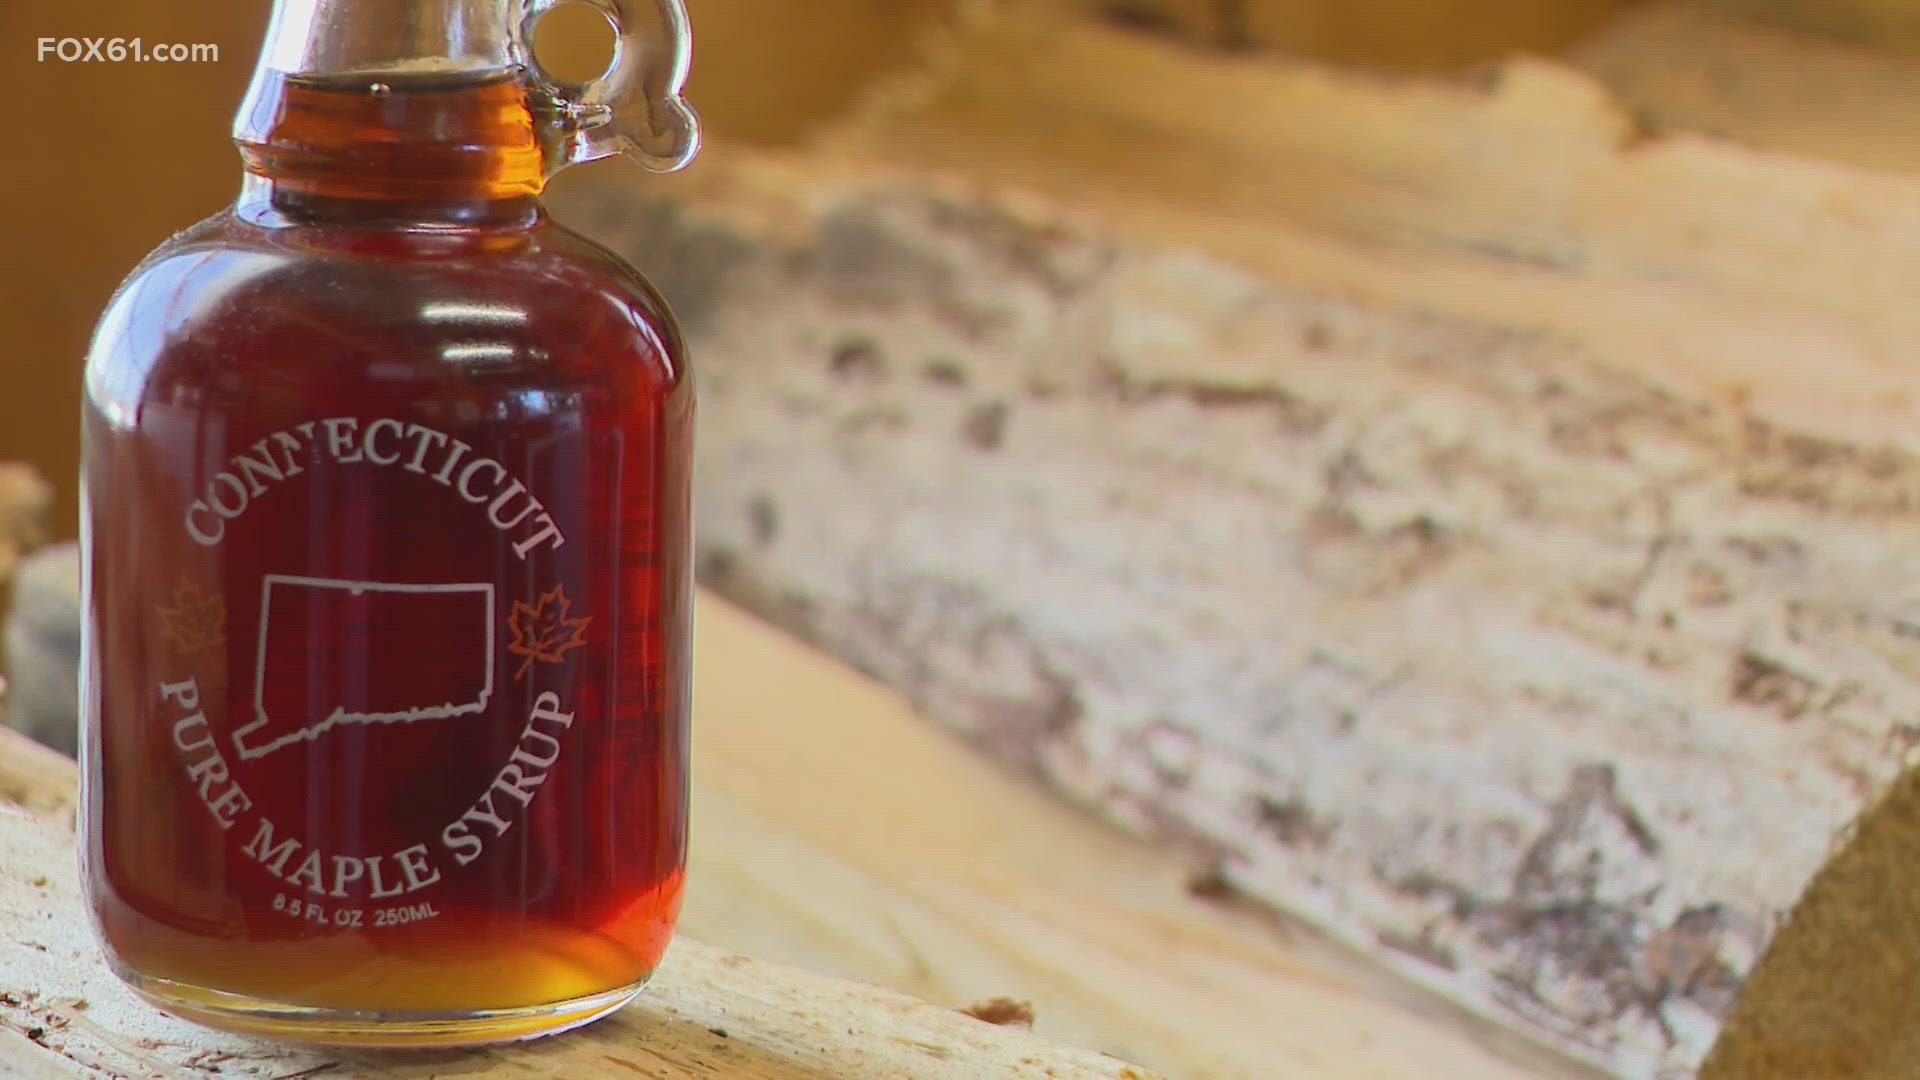 Spencer Luthy is surrounded by clouds of steam this time of year. Luthy, the owner of Maplewood Farm in Harwinton, has been making maple syrup for the past 15 years